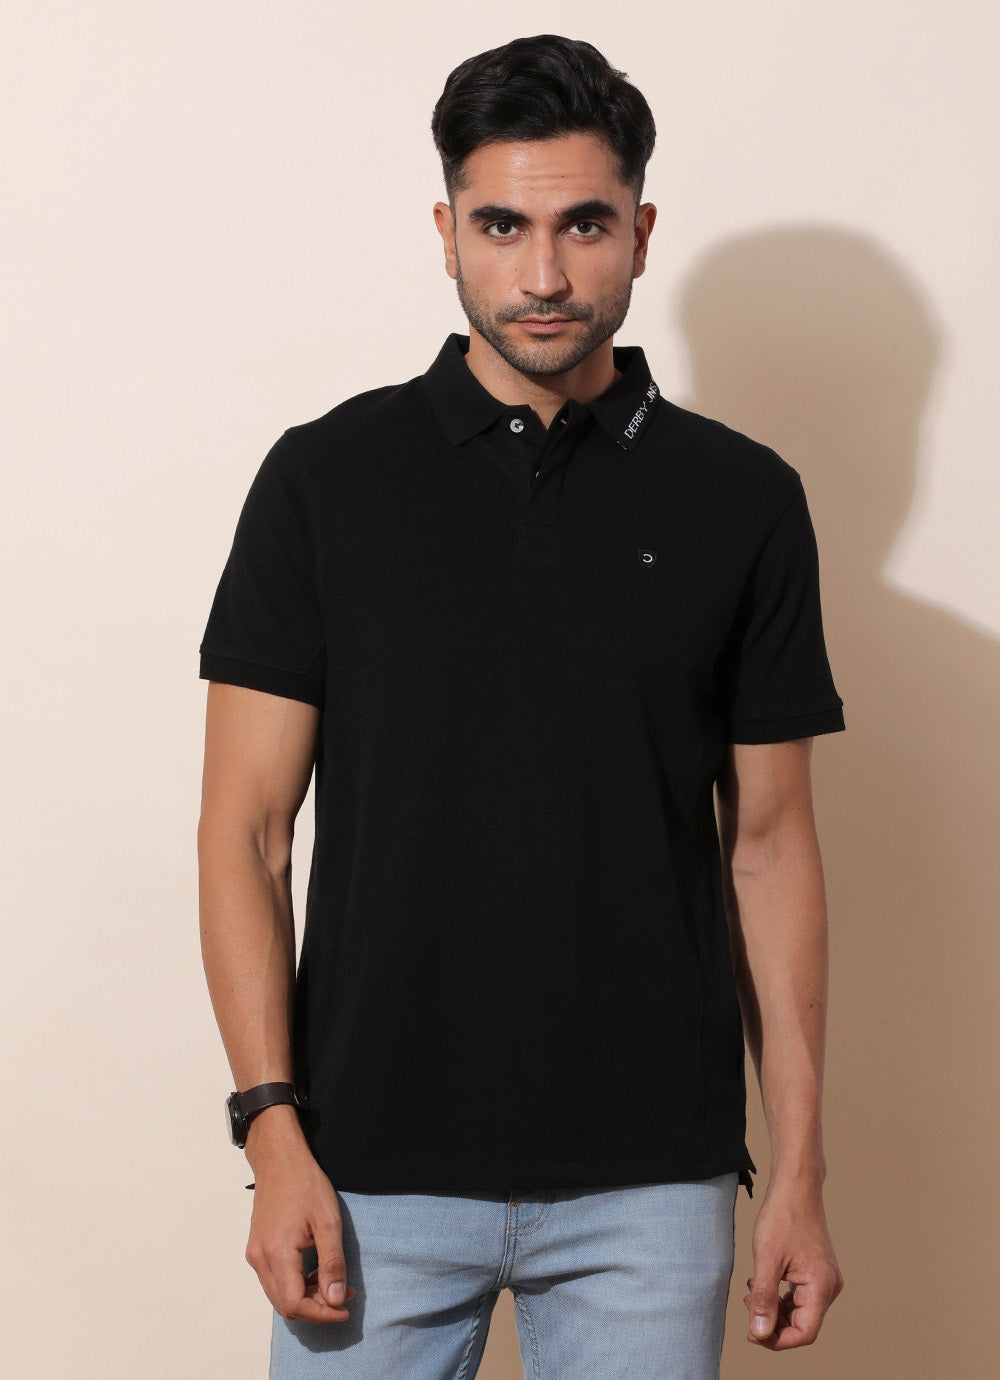 Sturdy Black (Crafted From Pique Cotton, Featuring A Classic Regular Fit Design).